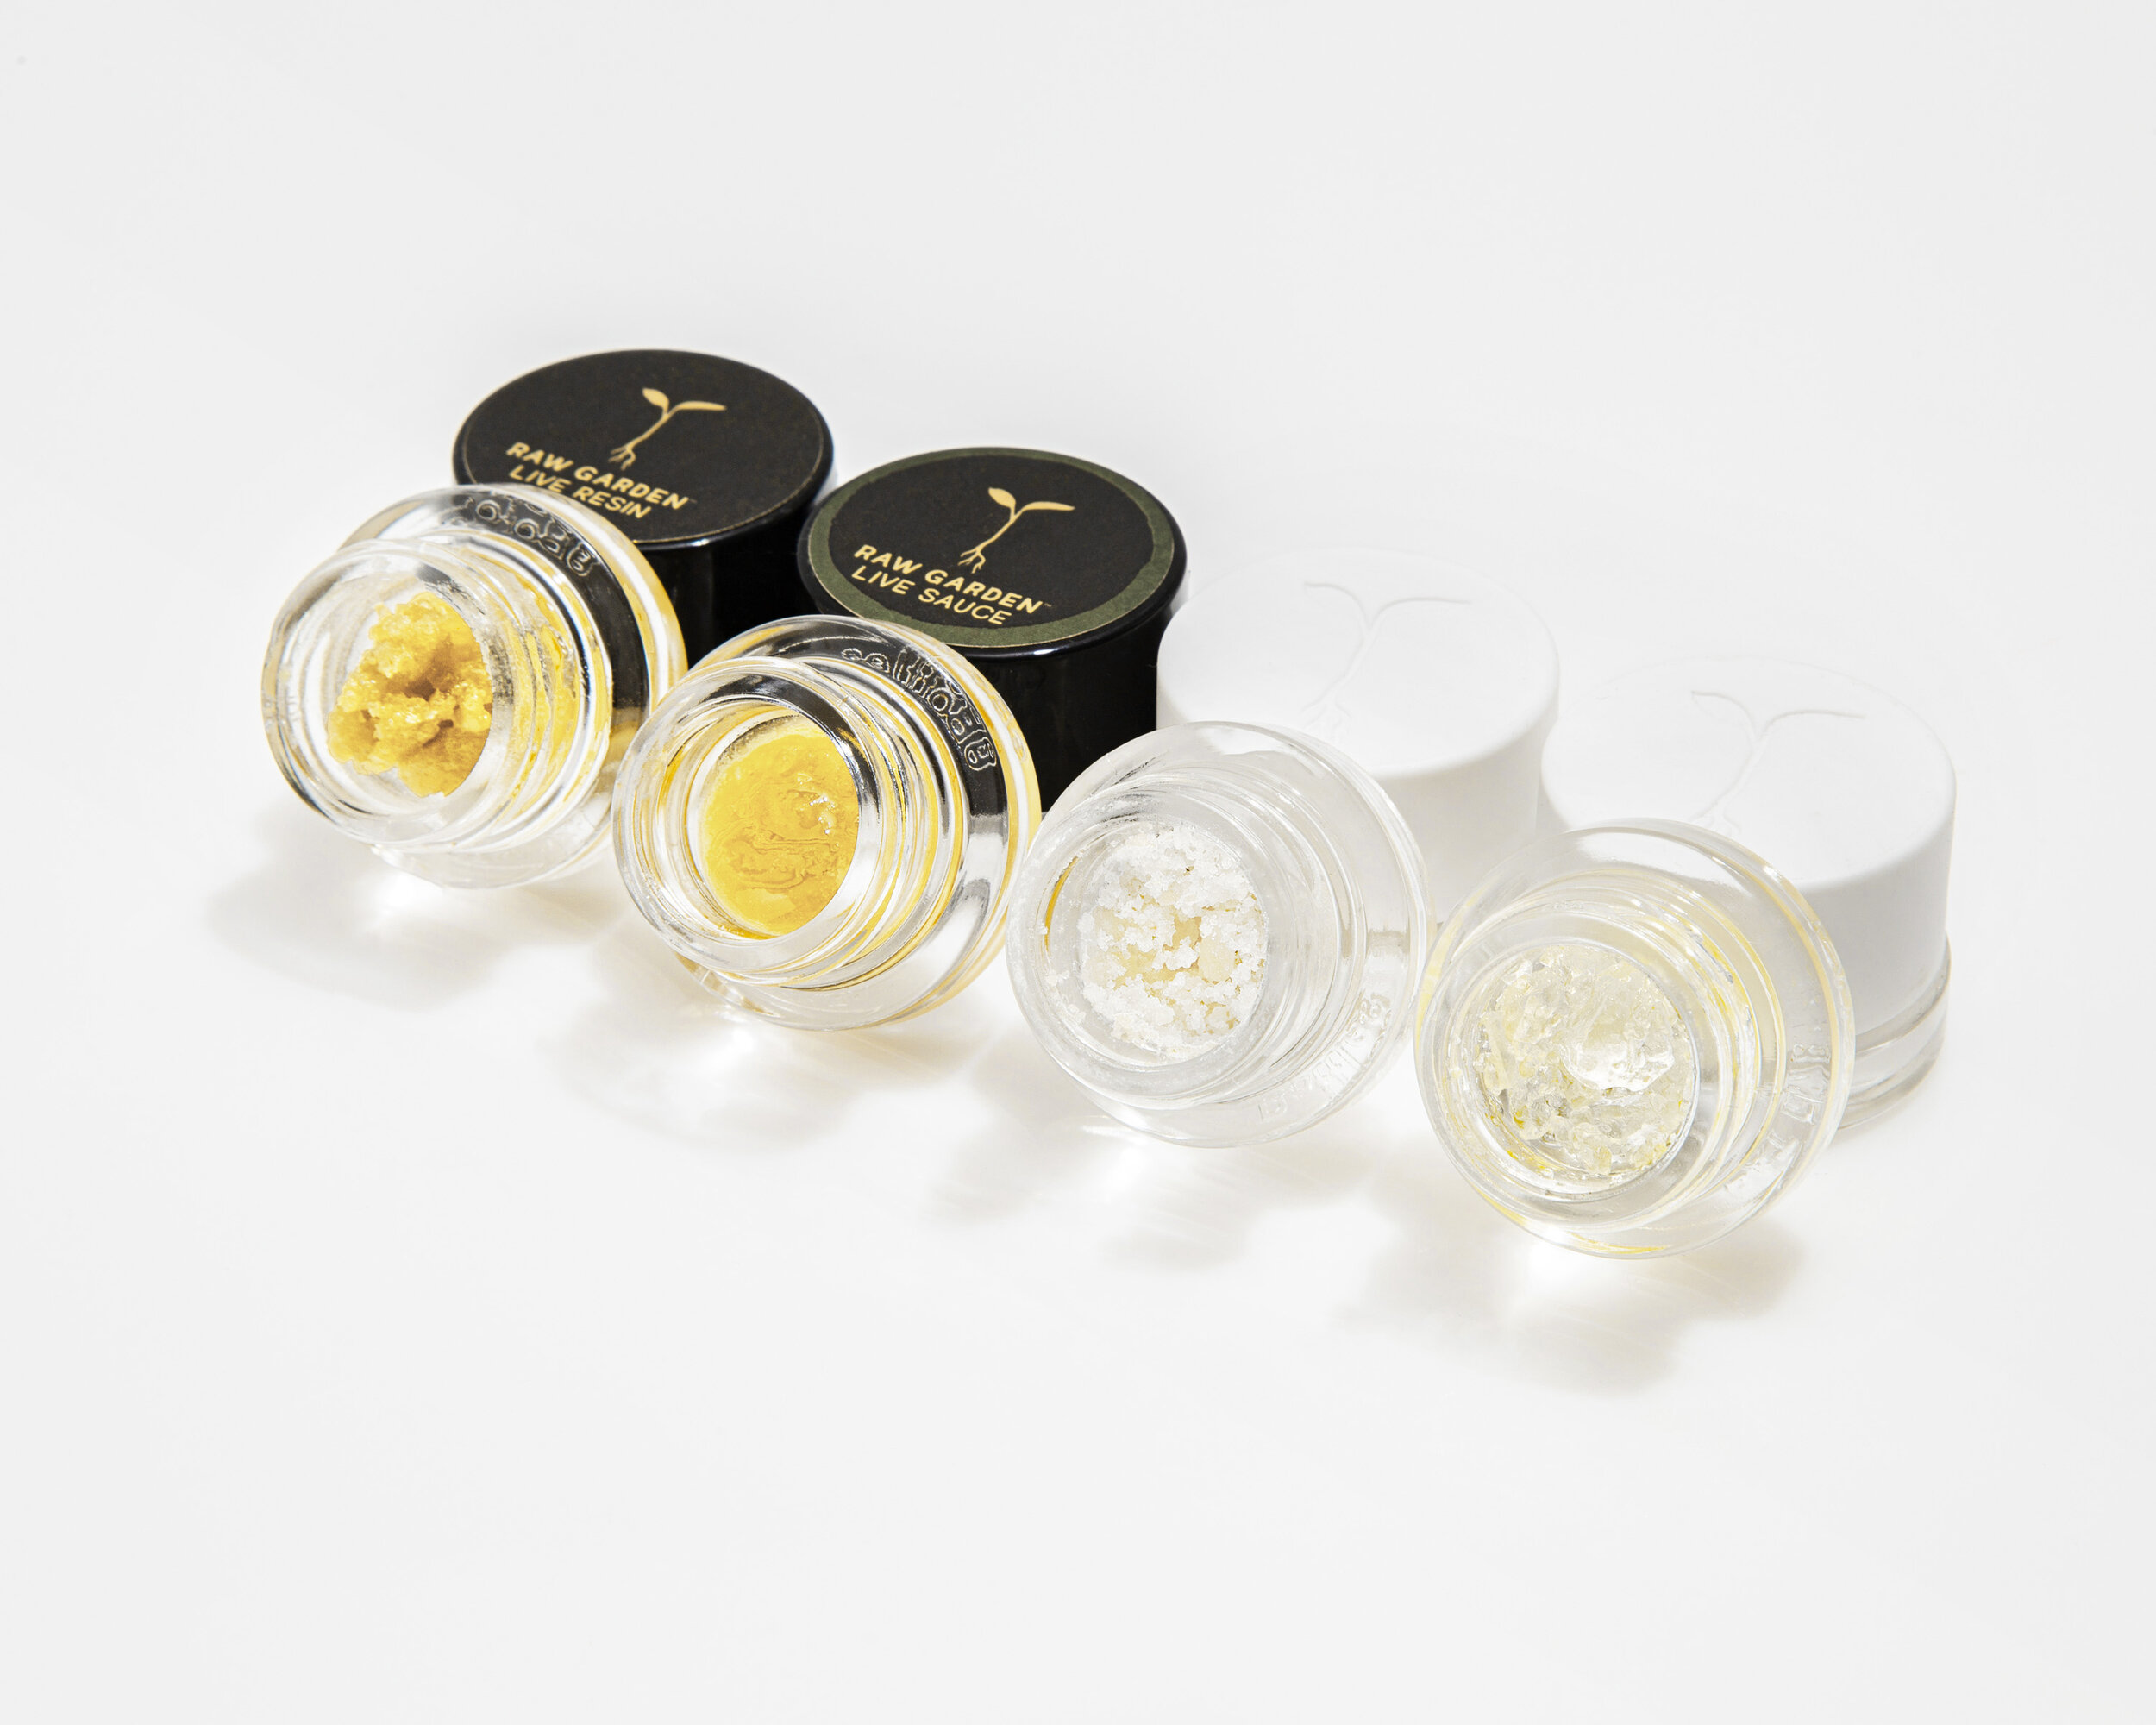 Raw Garden's very popular line of concentrates.